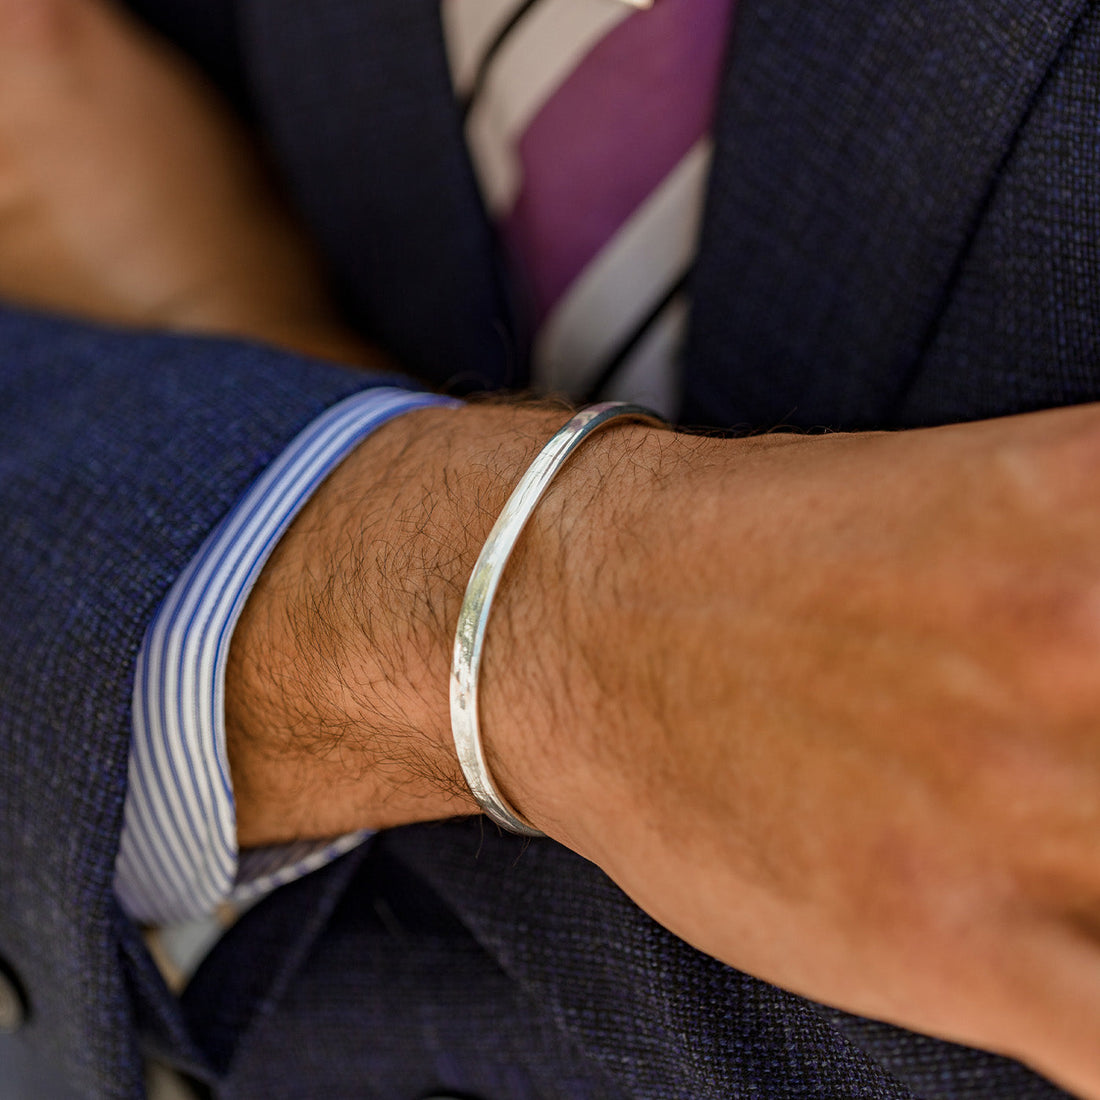 Close-up of a man's wrist wearing a silver bracelet, with a glimpse of his blue-striped shirt cuff and part of a navy suit.